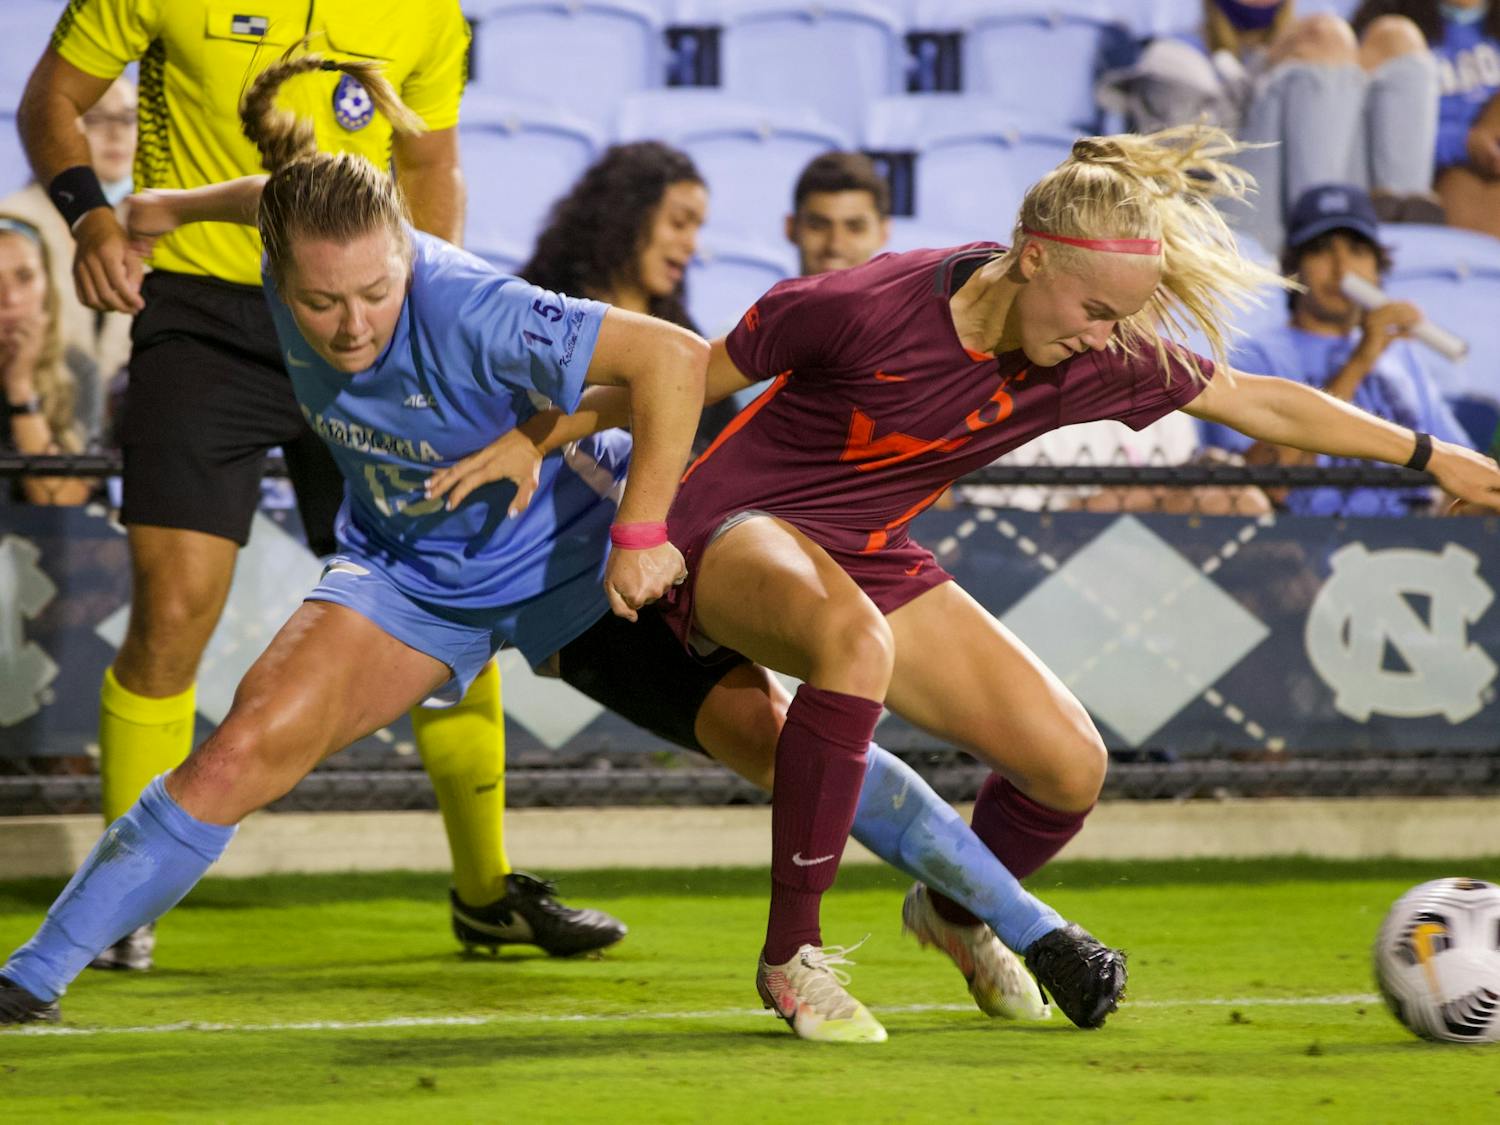 UNC sophomore forward Avery Patterson (15) attempts to retrieve the ball back from her opponent during a women's soccer game against Virginia Tech on Sept. 23, 2021, at Dorrance Field. UNC tied 2-2.